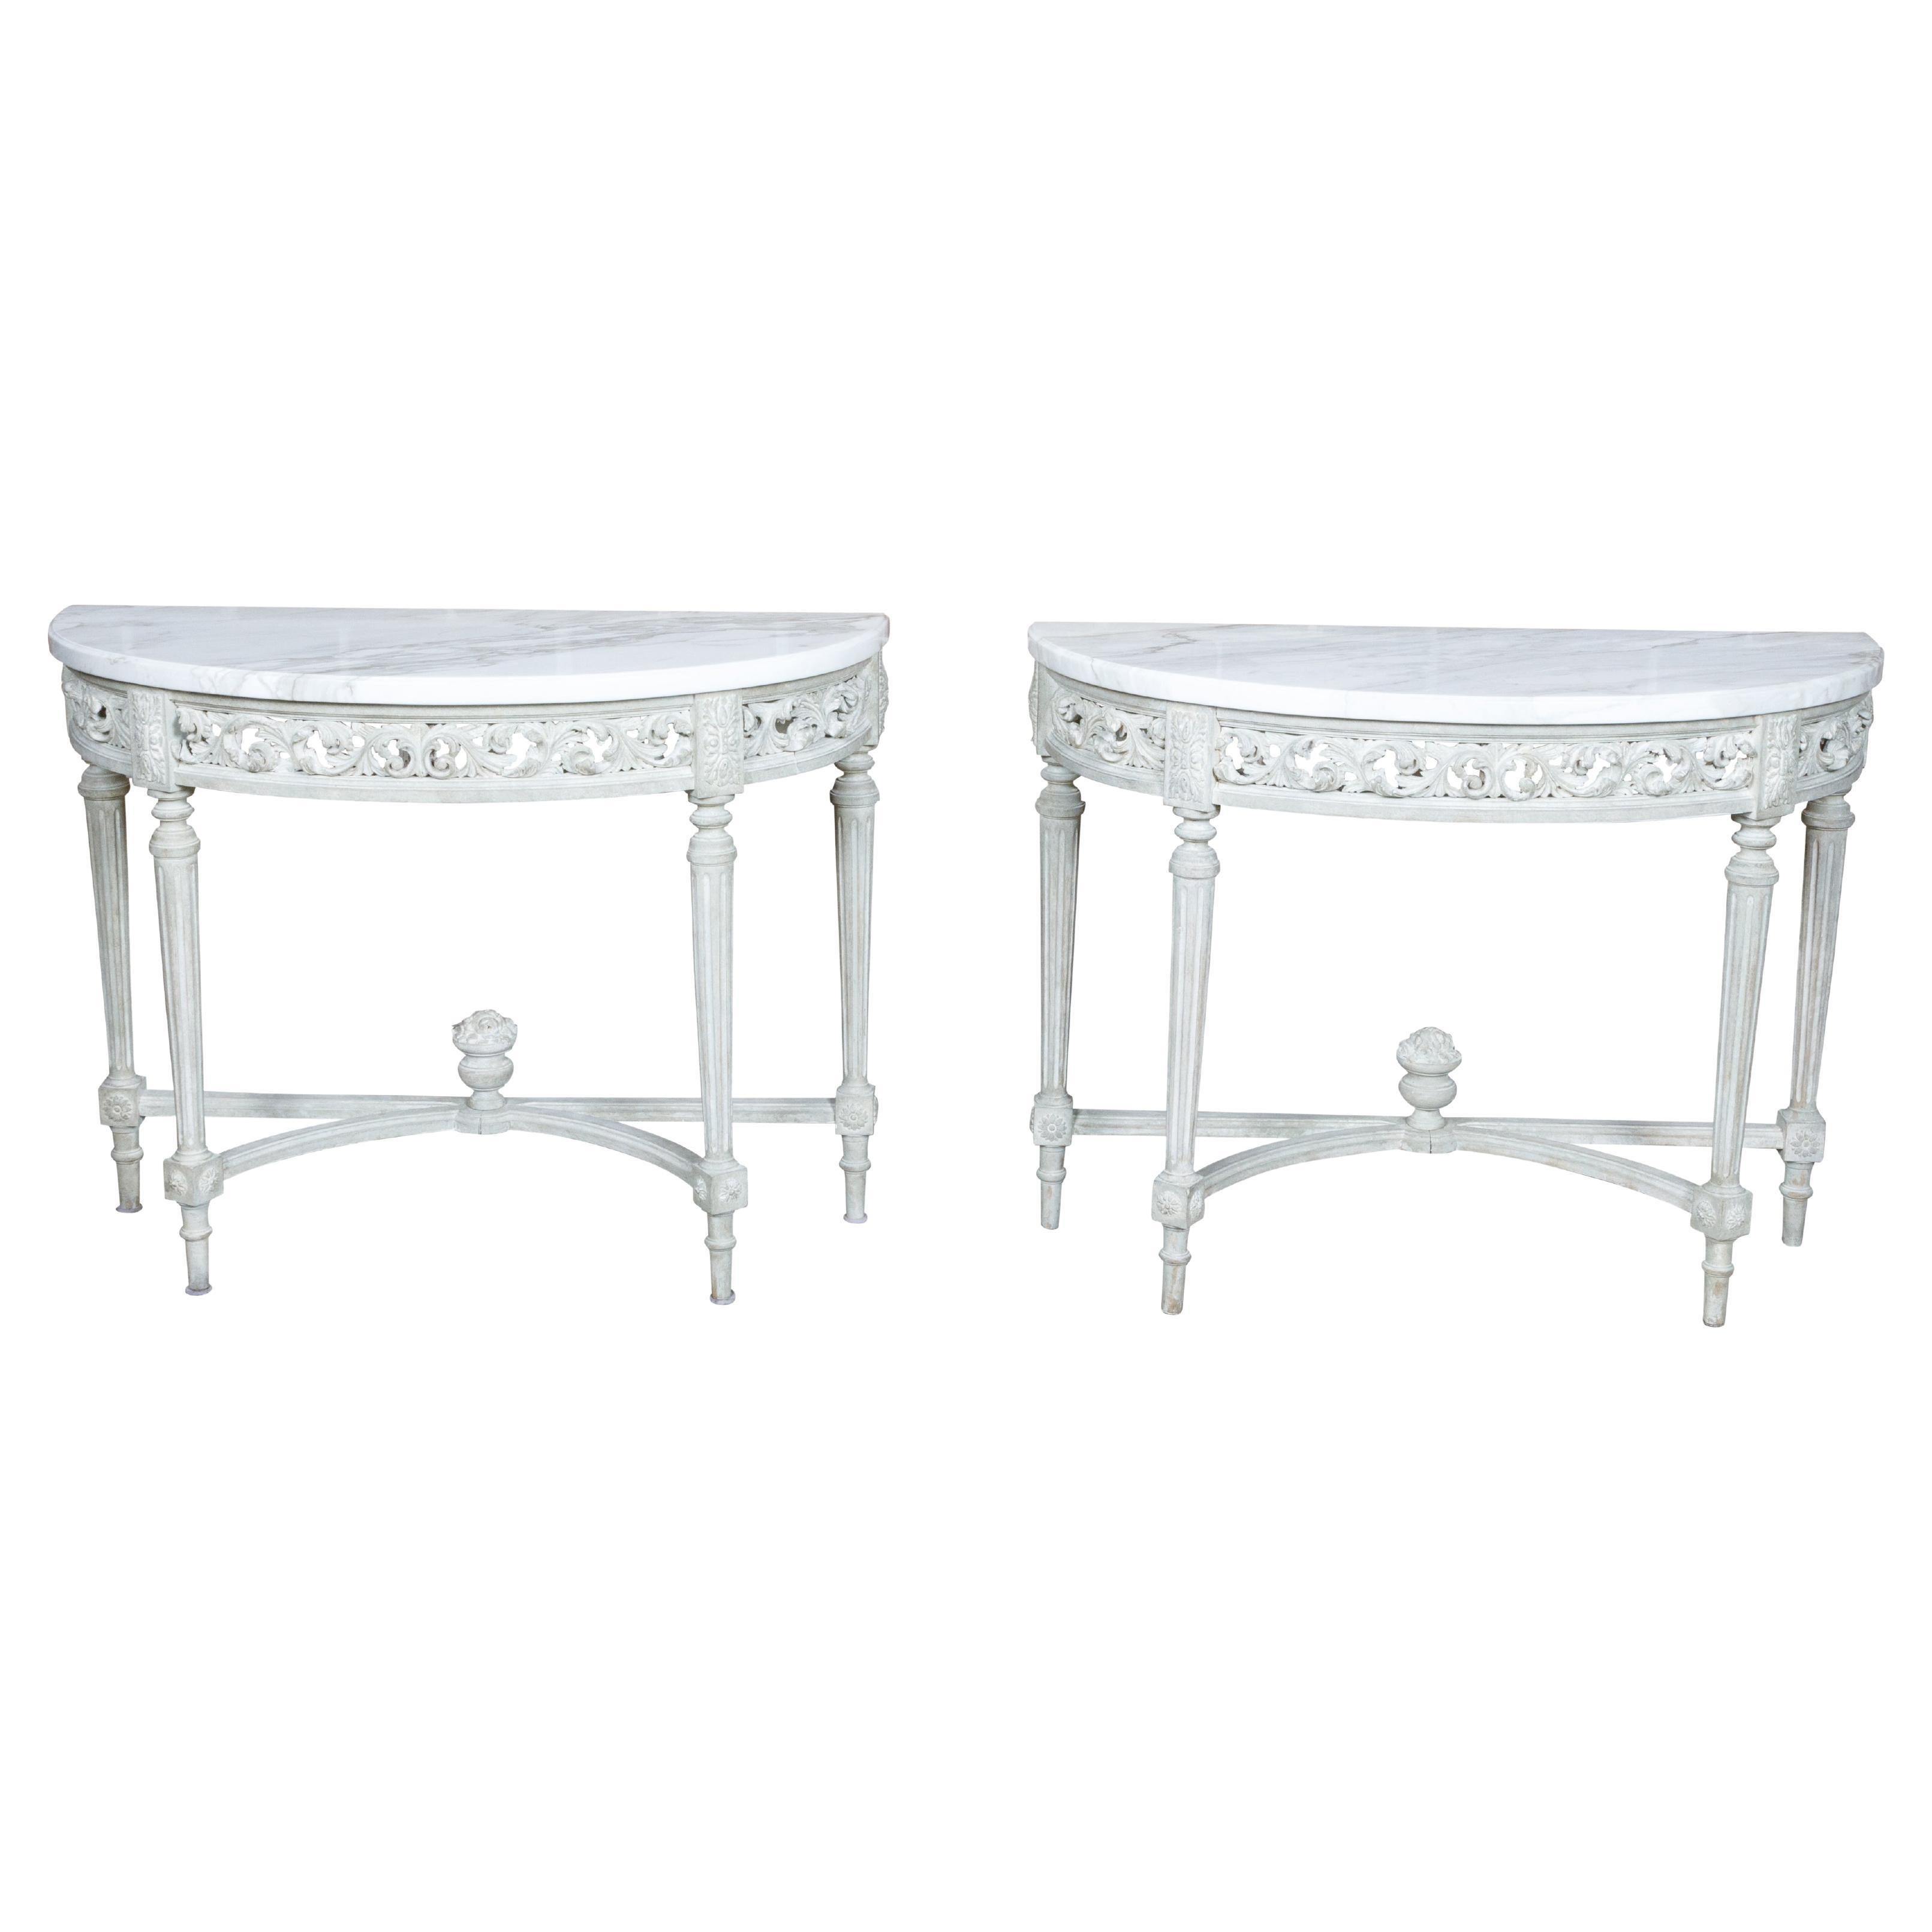 Pair of French Louis XVI Style Painted Demilune Console Tables with Marble Tops